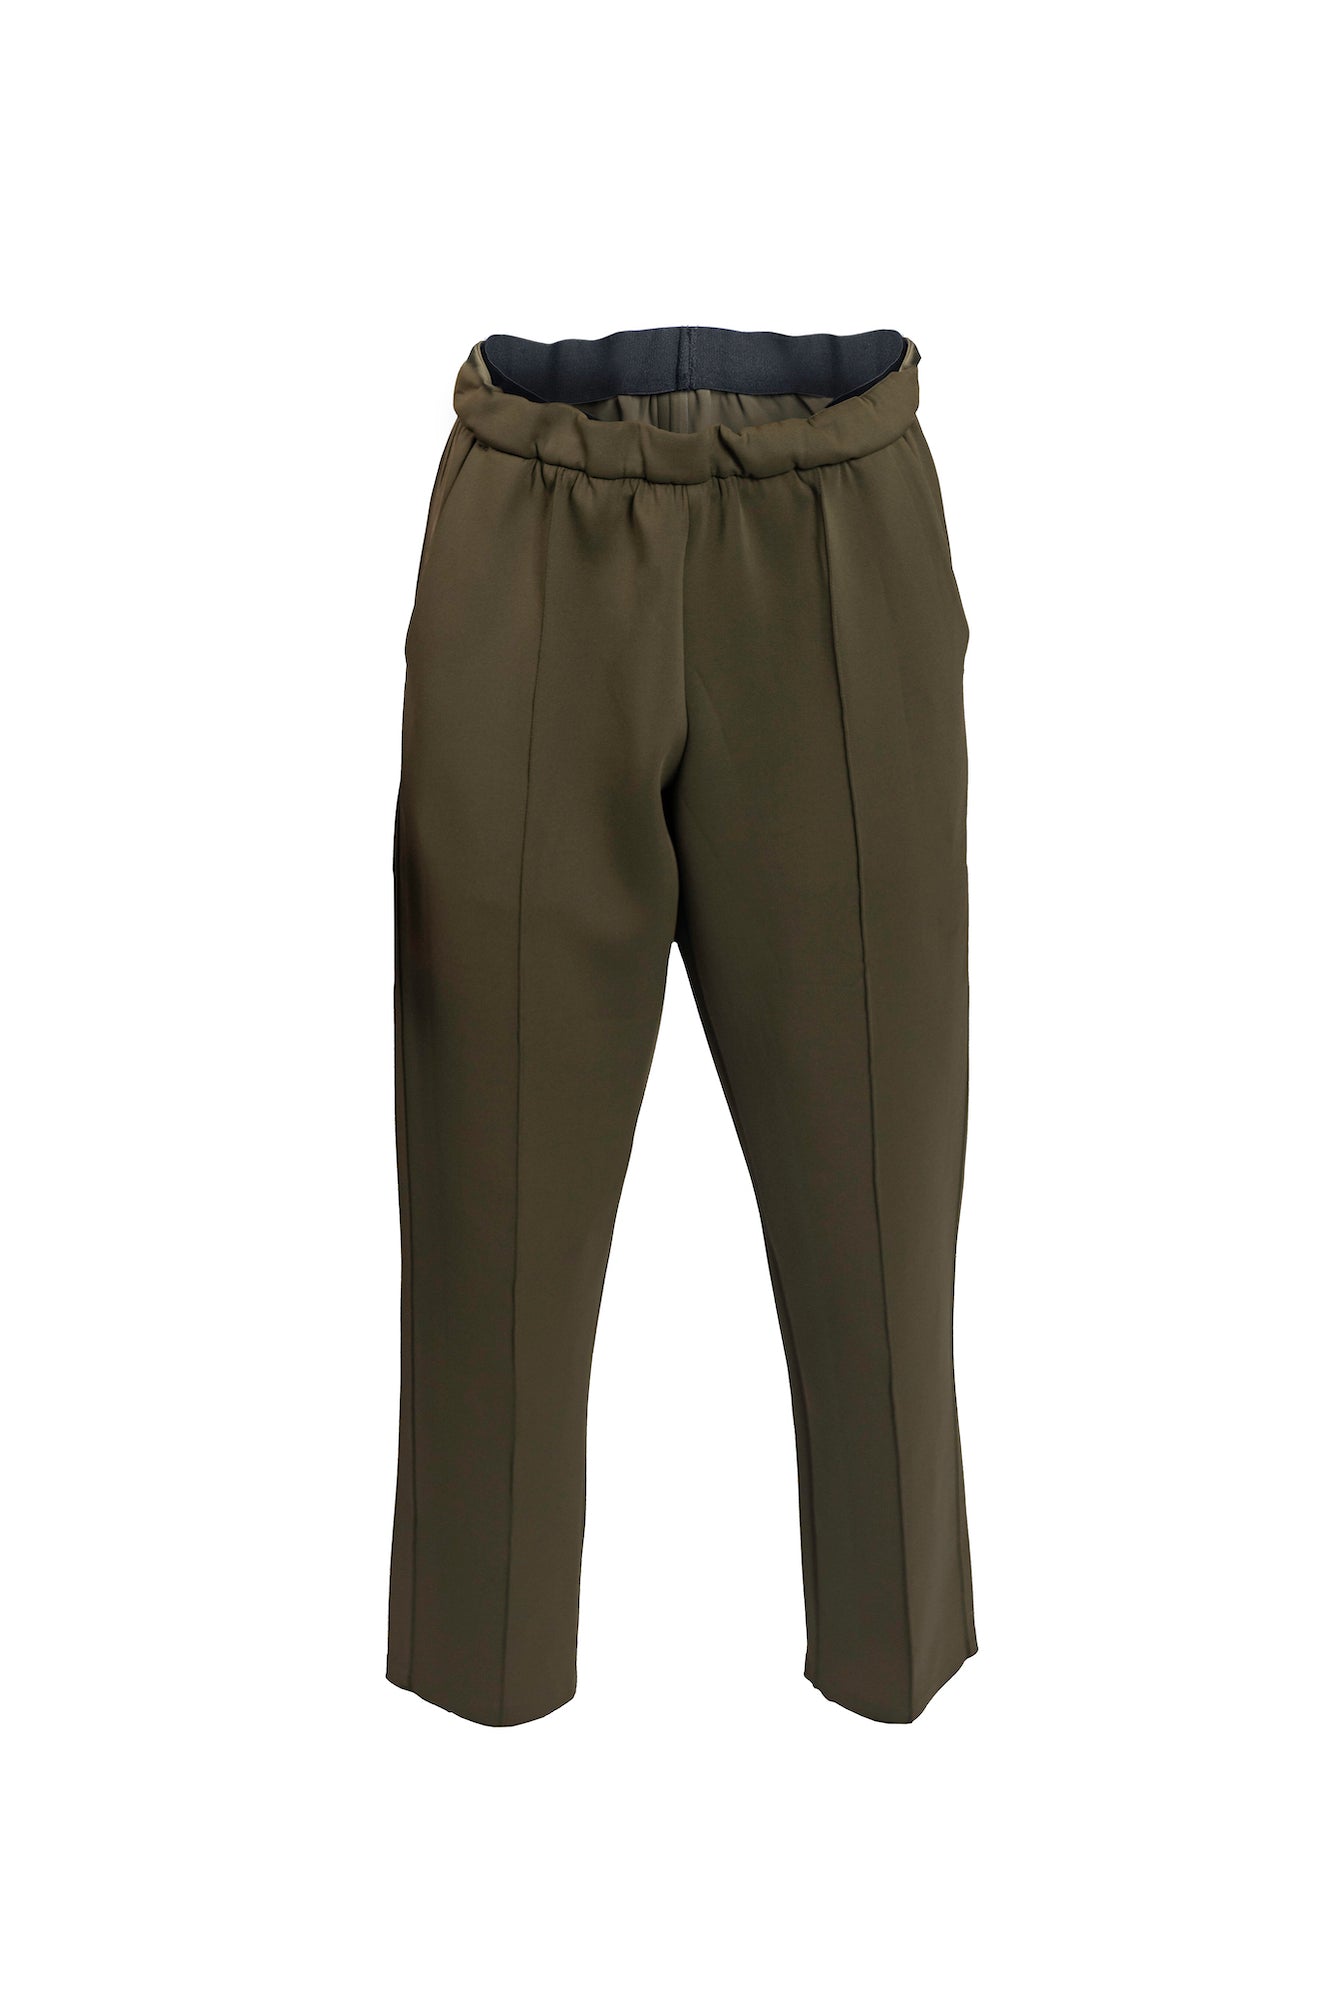 Women's Army Trousers